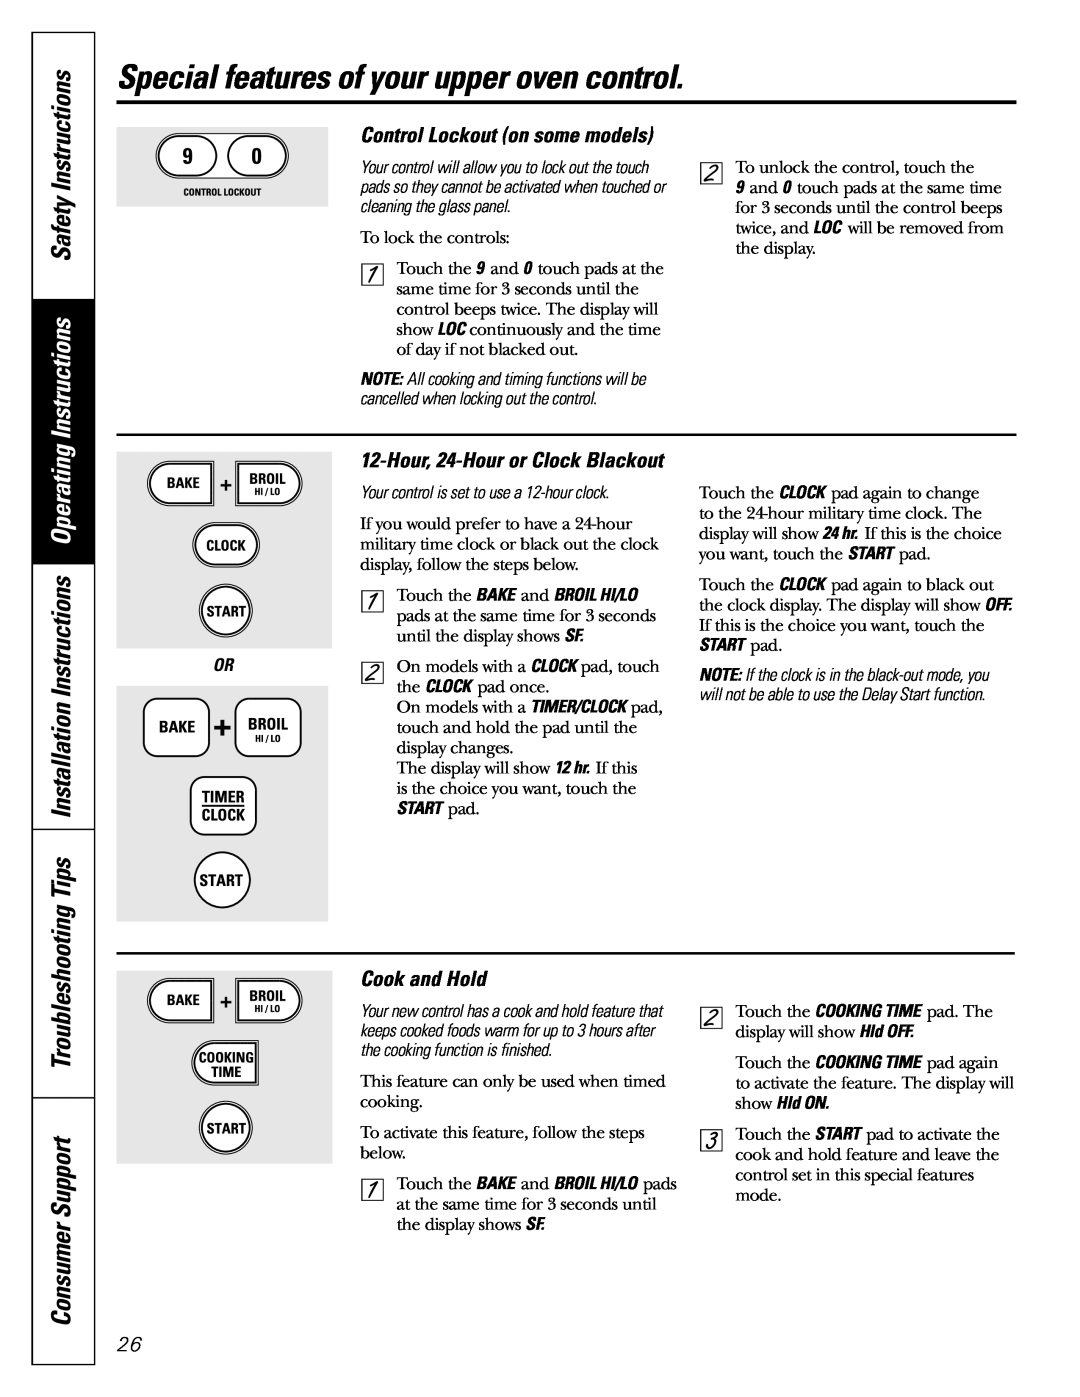 GE JGBP88 Tips Installation Instructions Operating, Control Lockout on some models, Cook and Hold, Instructions Safety 